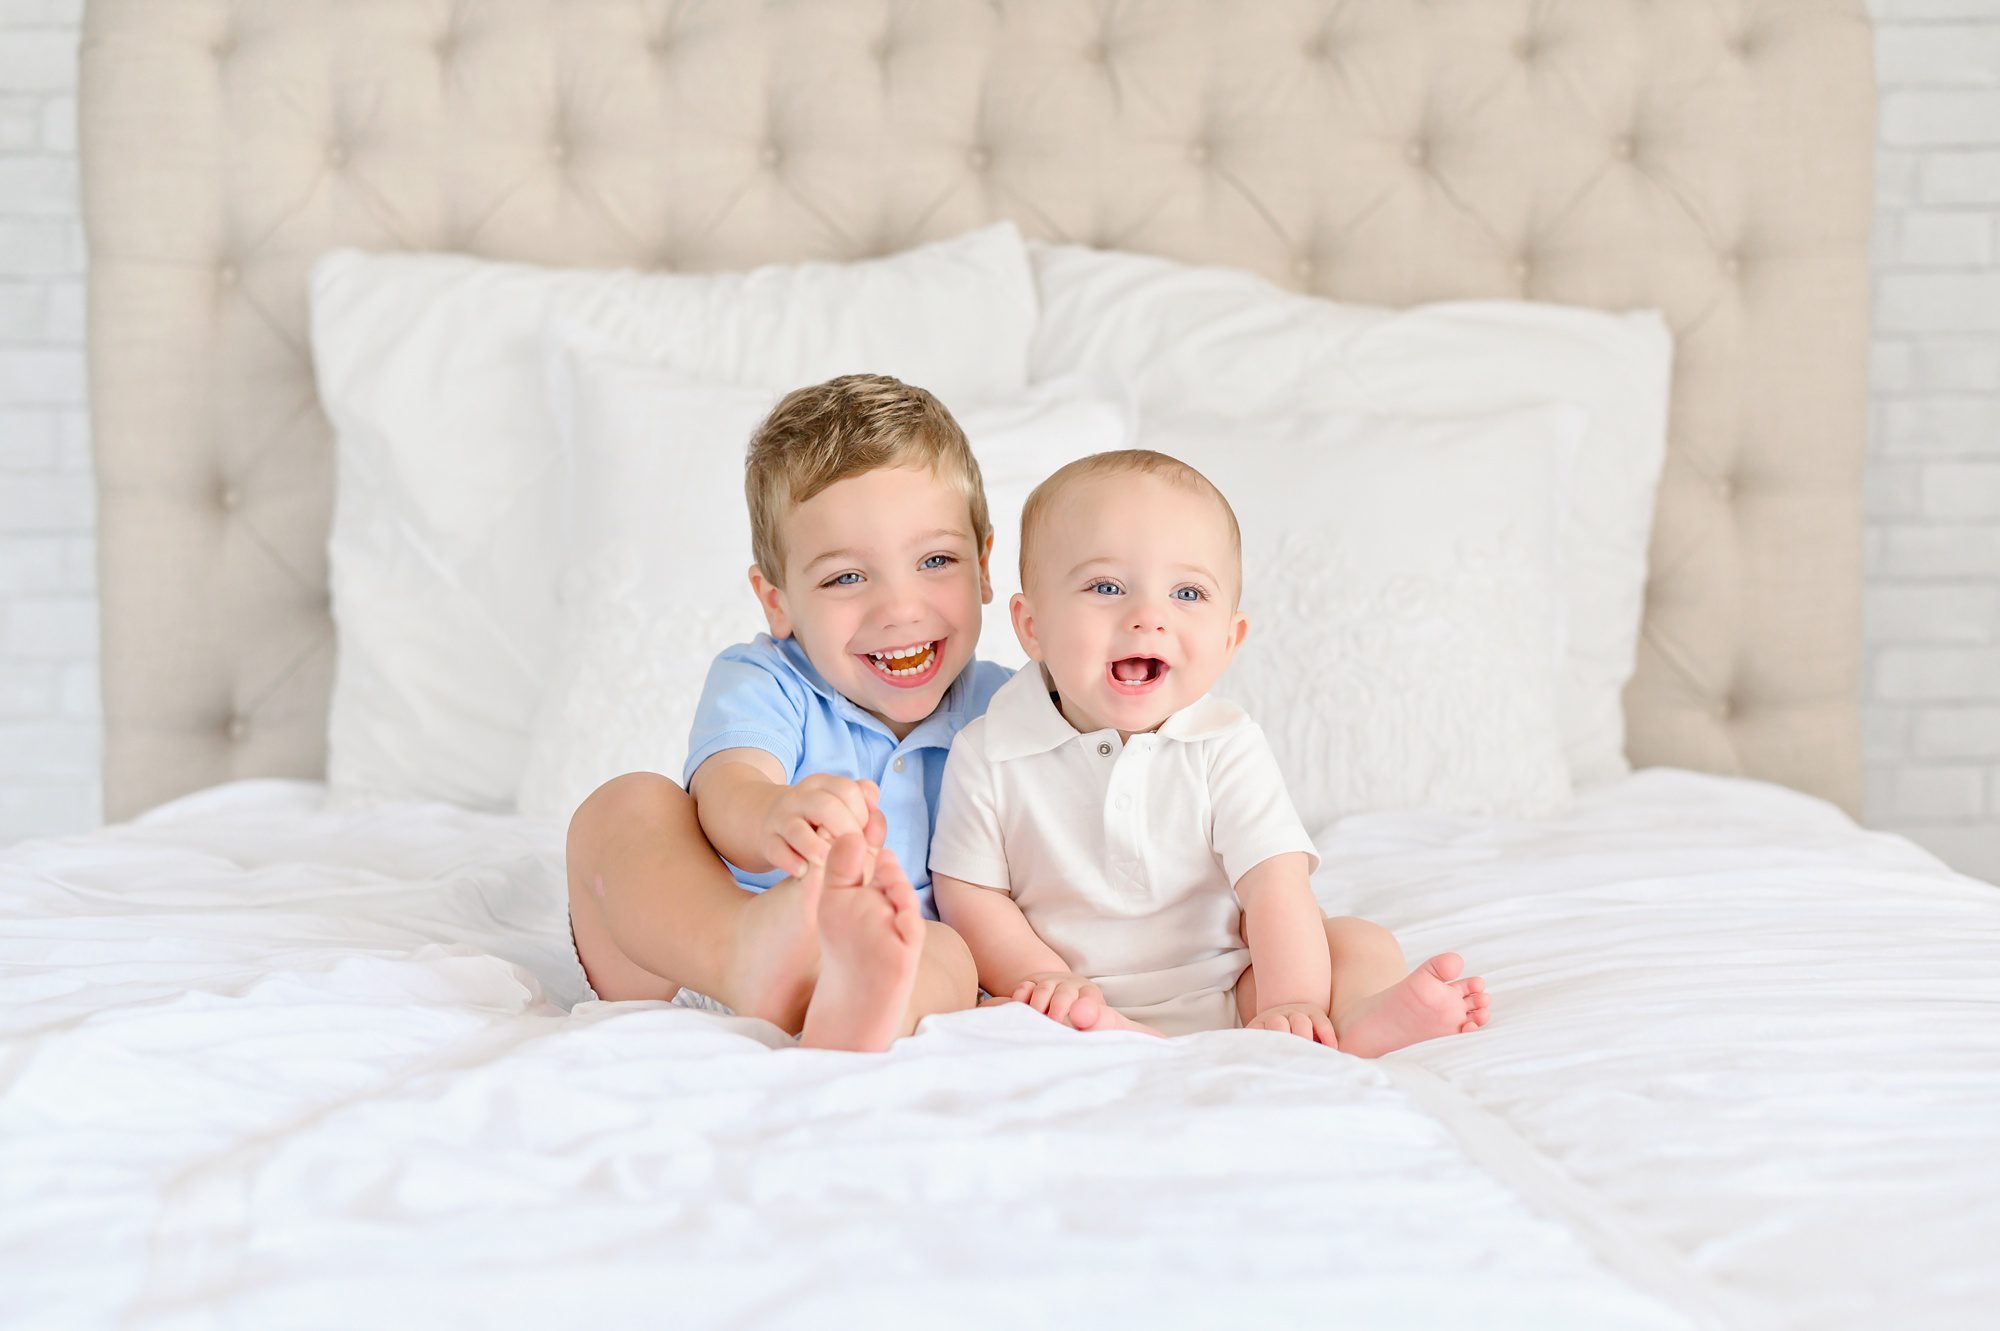 An adorable blue eyed baby boy gets his 6 month portraits done on a white bed in a studio in Tampa, FL and his older brother jumps in for a few.